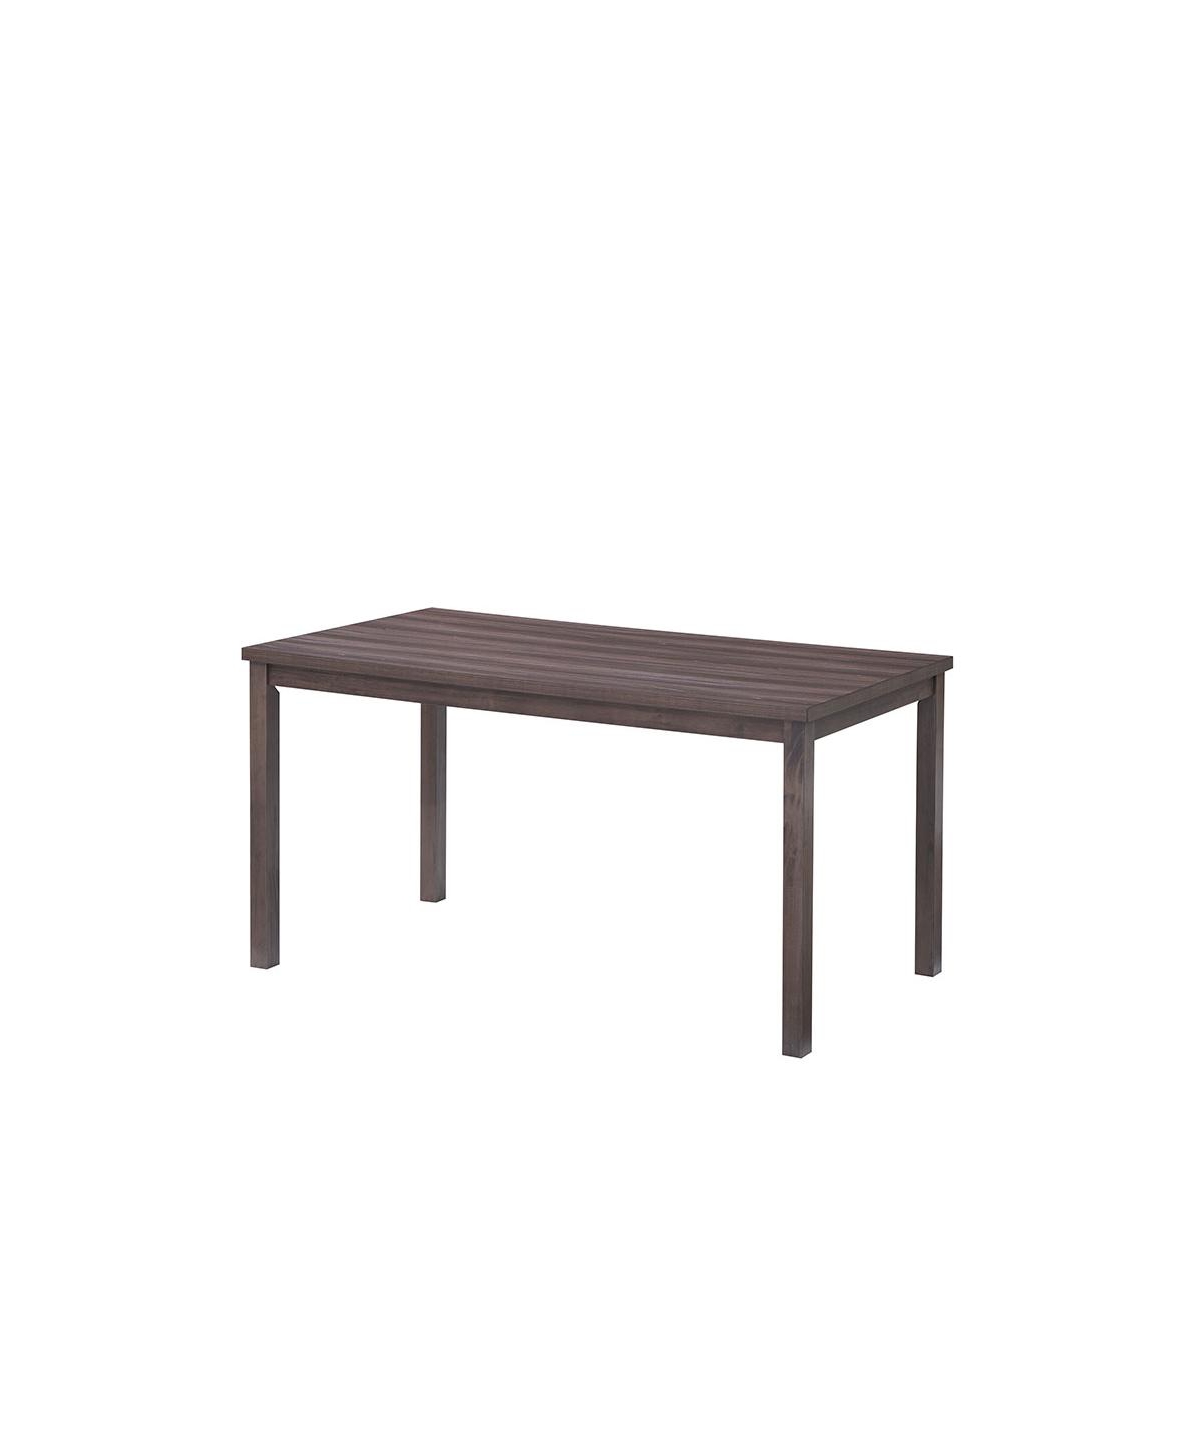 Max Meadows Laminate Counter Height Table